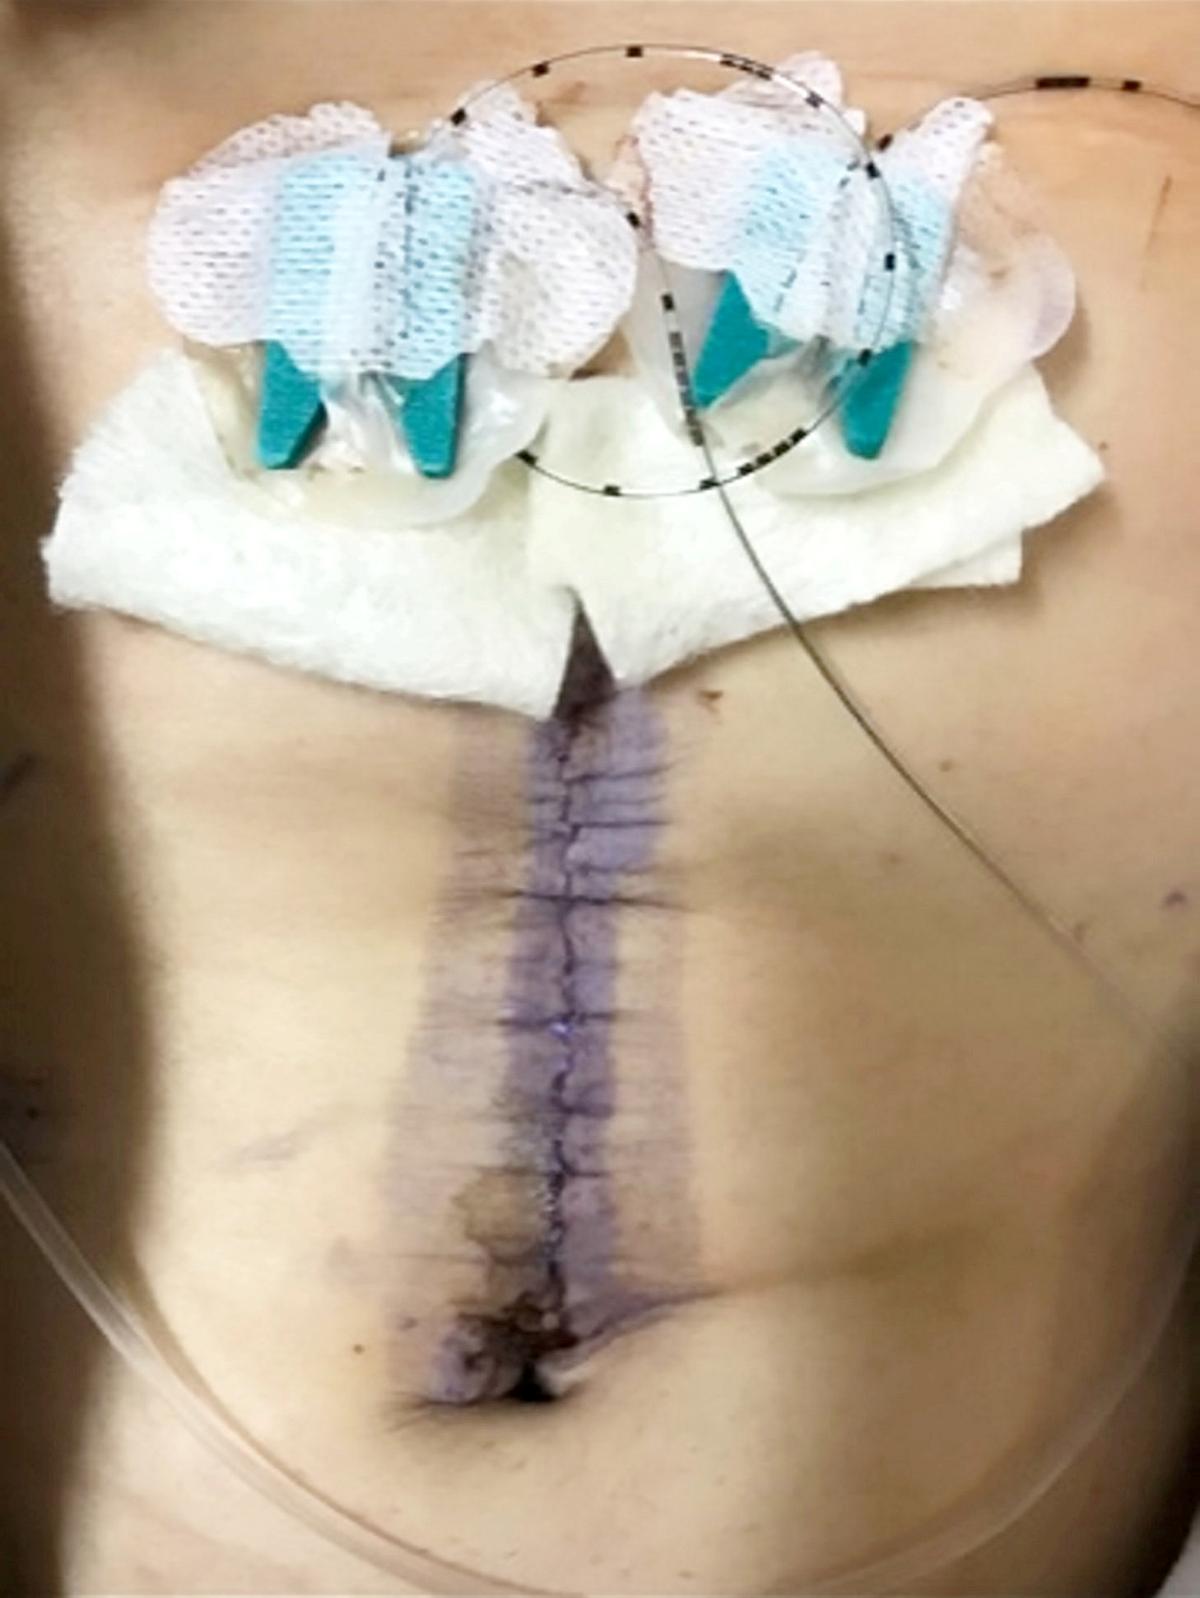 Sam's scar after the life-saving surgery. (SWNS)